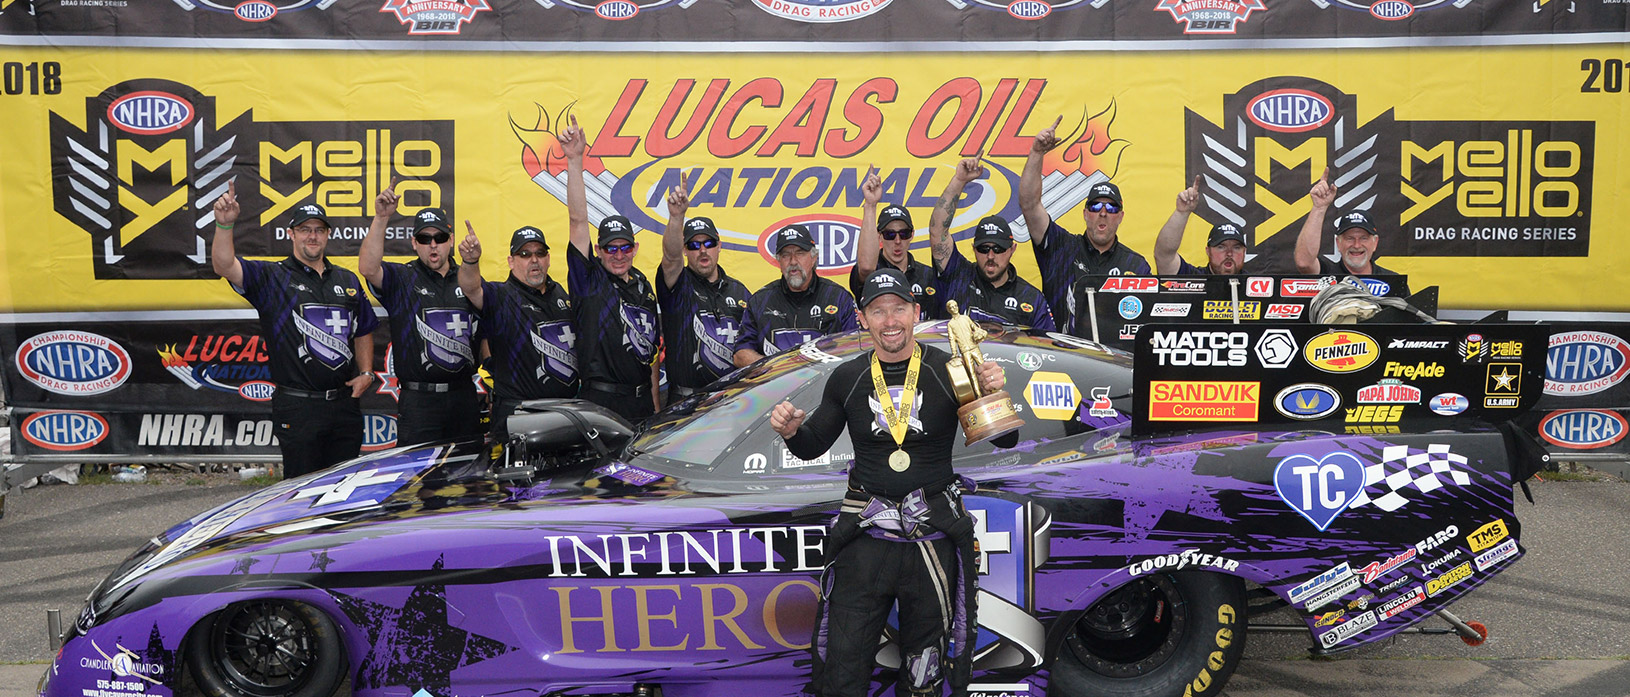 Man posing with racecar and team after wining Lucas oil nationals